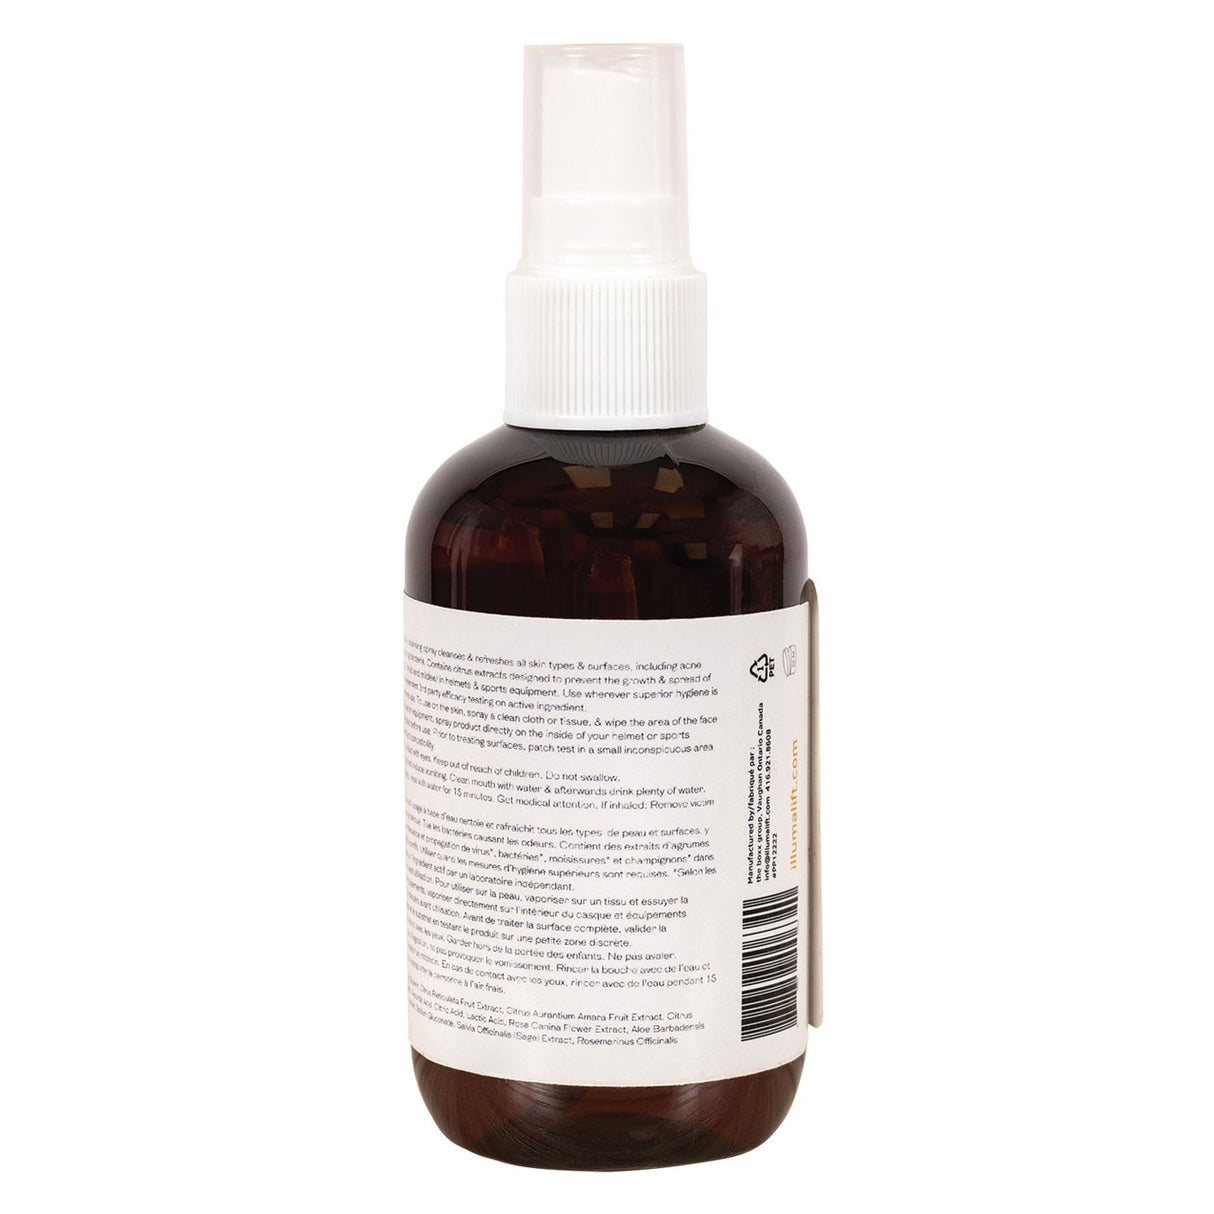 Post Play Equipment Cleaning Spray 3.5 oz.